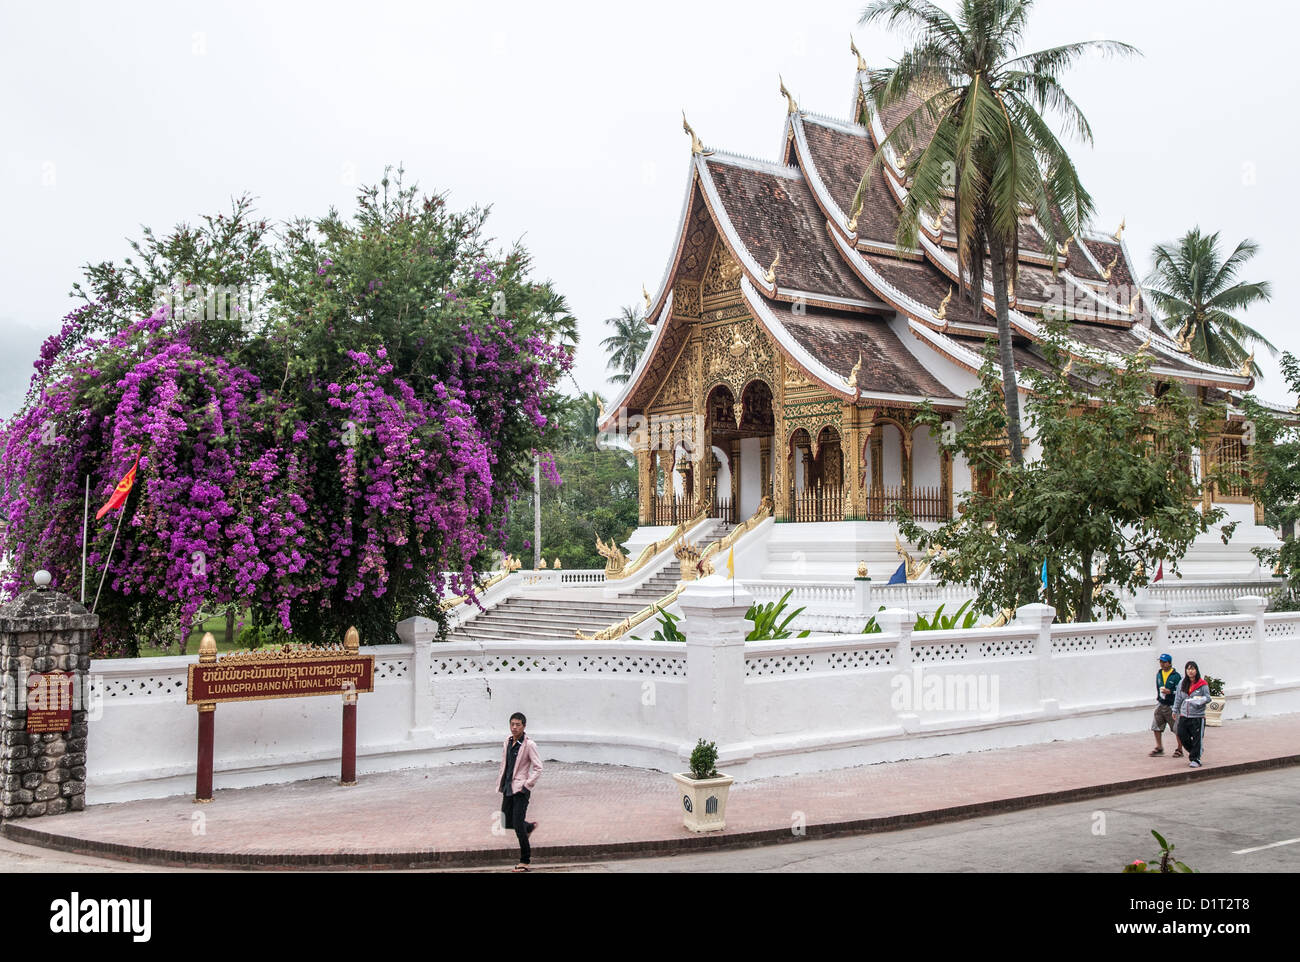 Haw Pha Bang (or Palace Chapel) at the Royal Palace Museum (Luang Prabang National Museum) in Luang Prabang, Laos. The chapel sits at the northeastern corner of the grounds. Construction started in 1963. Stock Photo